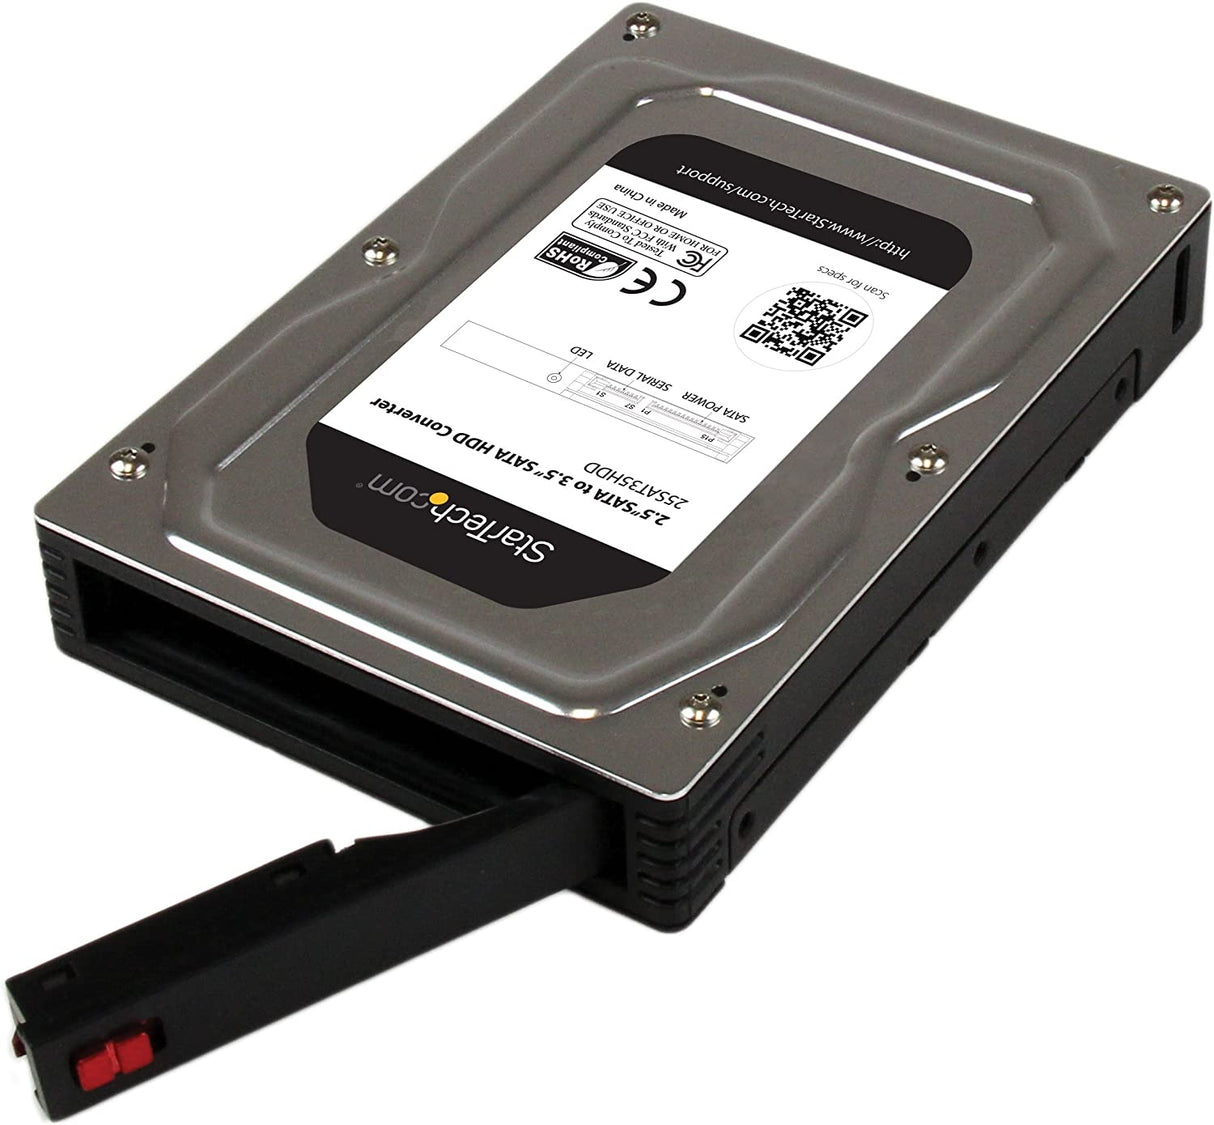 StarTech.com 2.5" to 3.5" SATA HDD/SSD Adapter Enclosure - External Hard Drive Converter with HDD/SSD Height up to 12.5mm (25SAT35HDD), Gray 2.5in SATA Drive 3.5in SATA Enclosure